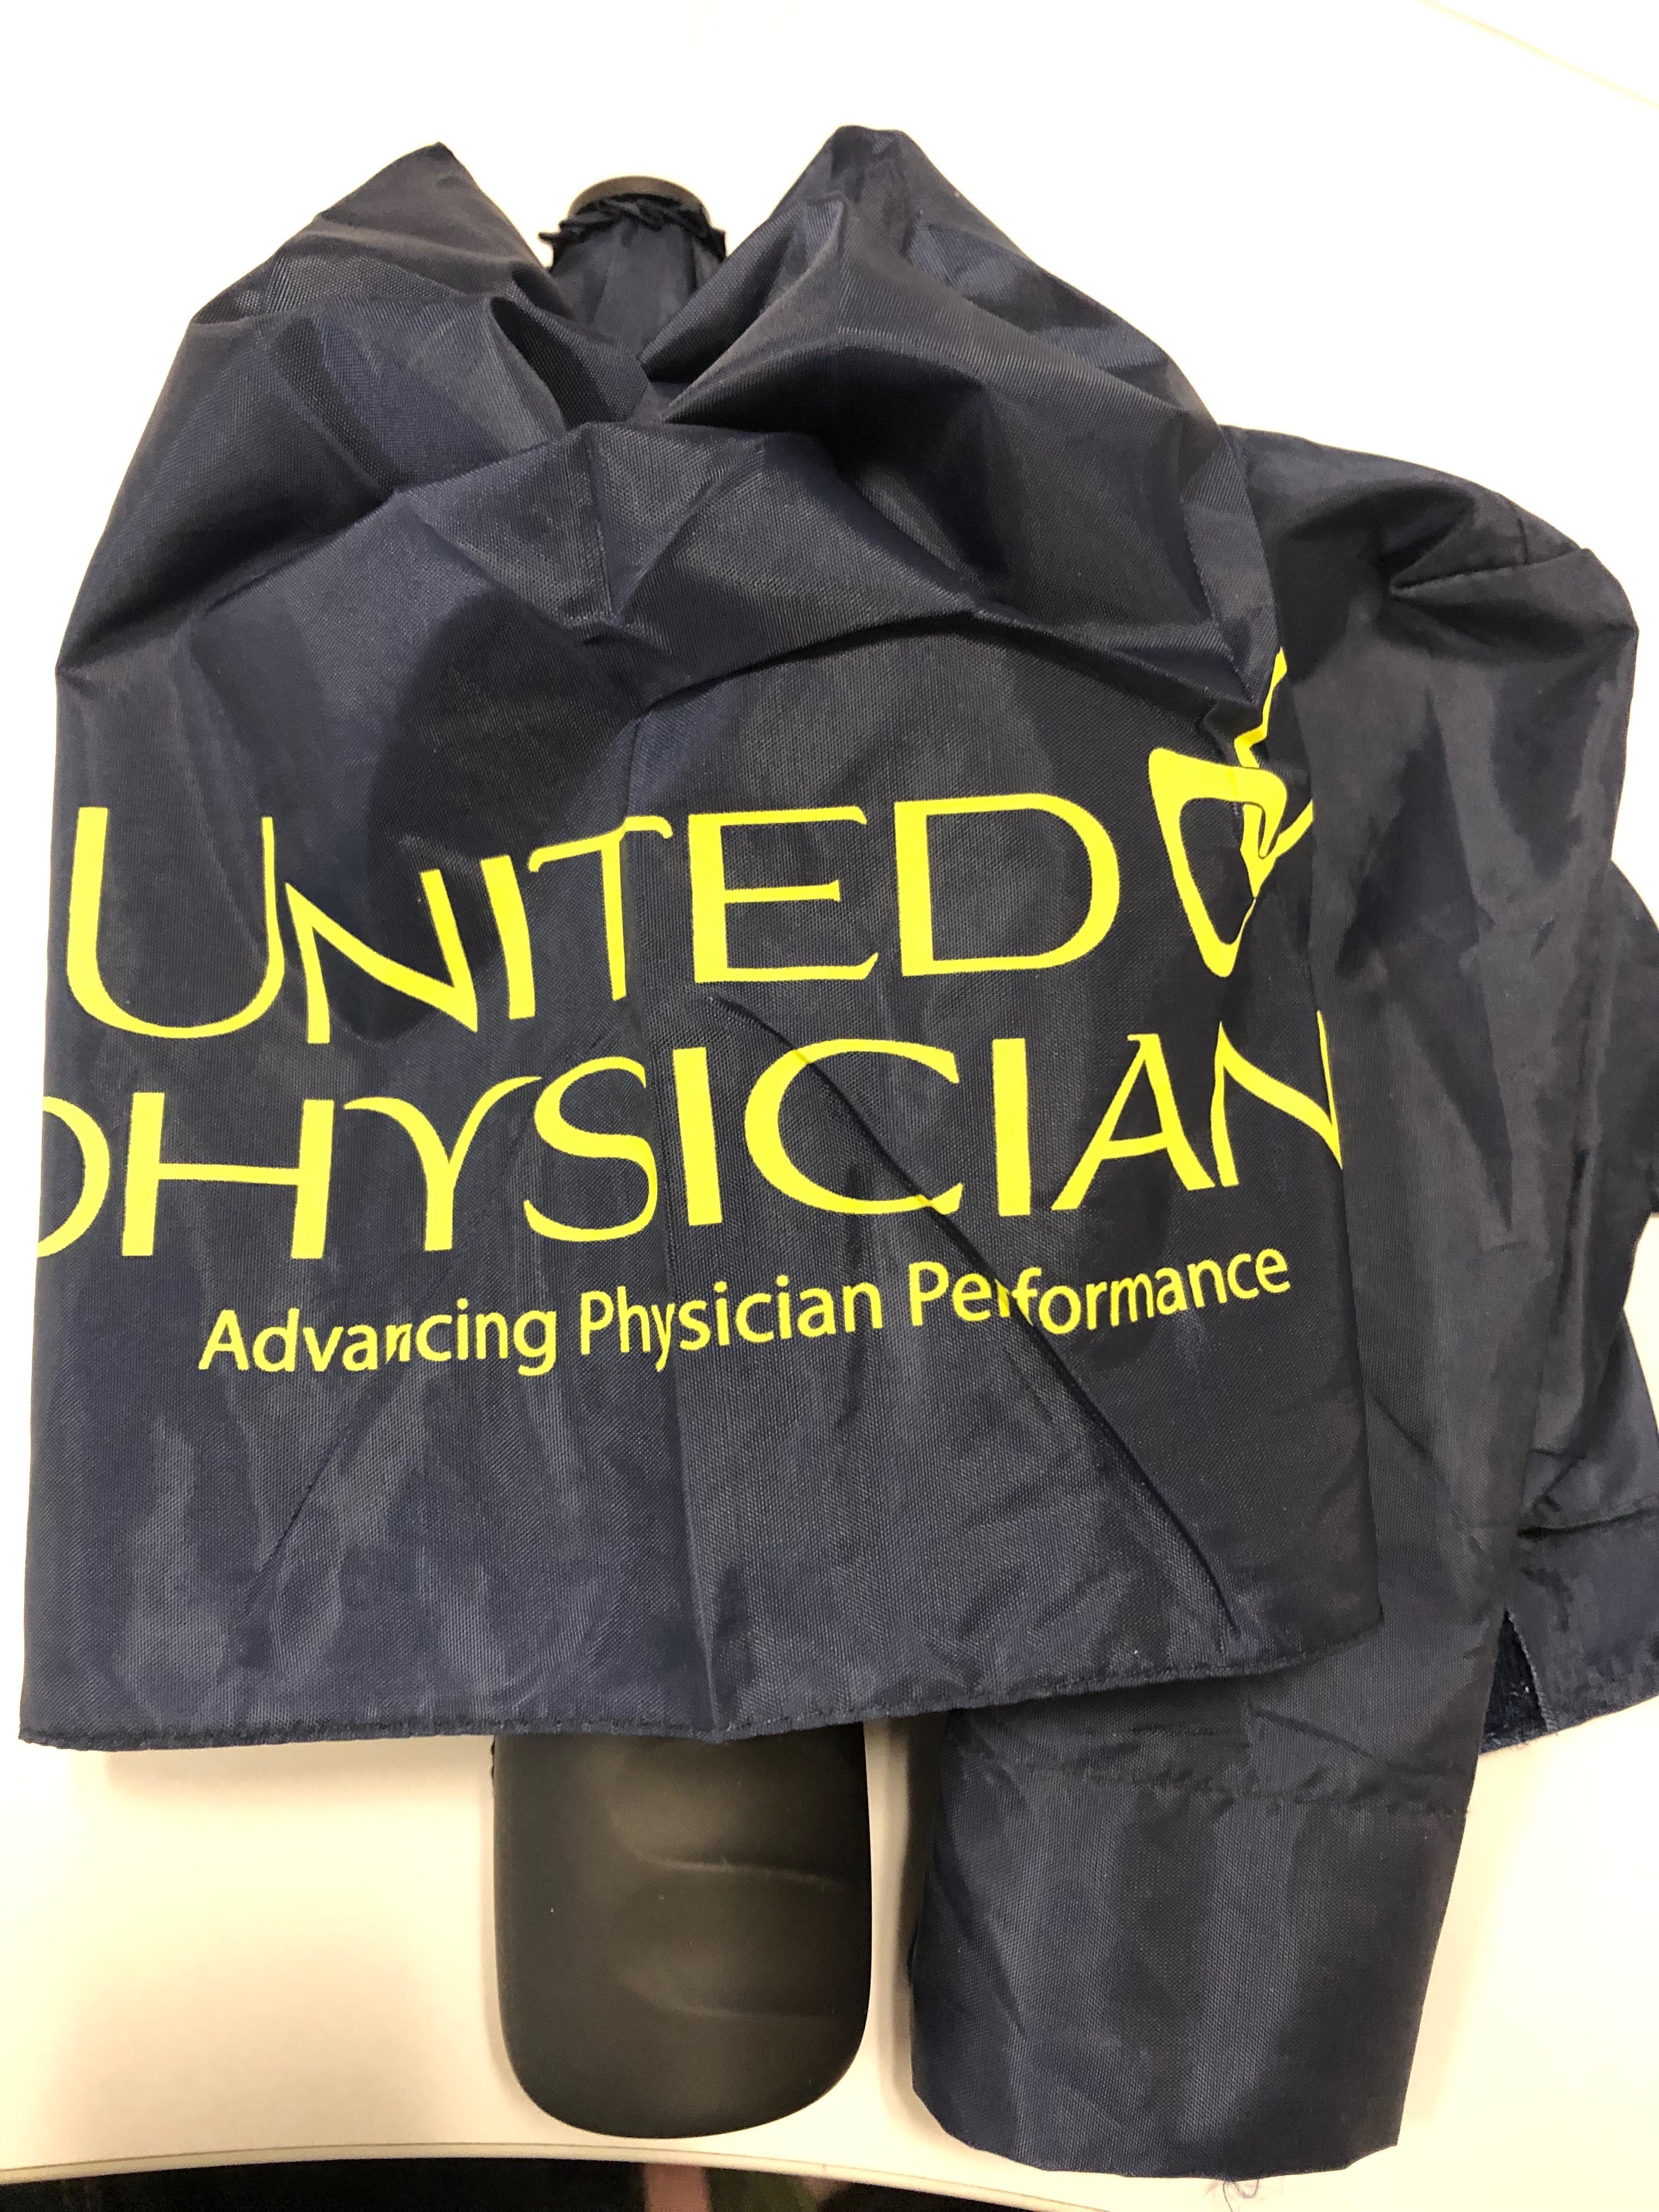 Umbrella from United Physicians